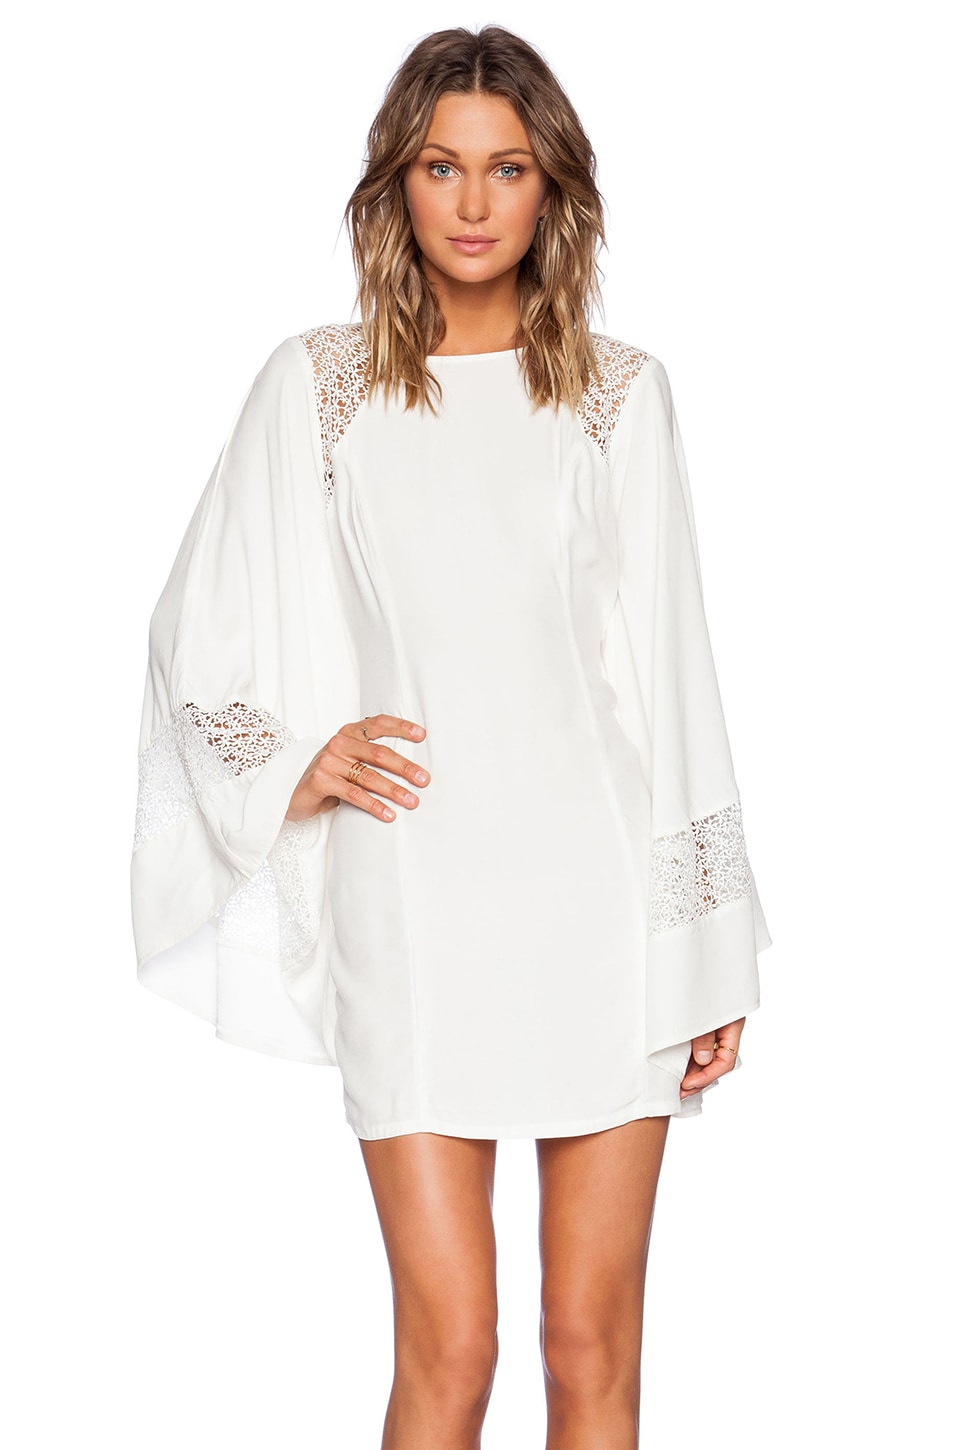 bless'ed are the meek Congo Dress in Ivory | REVOLVE